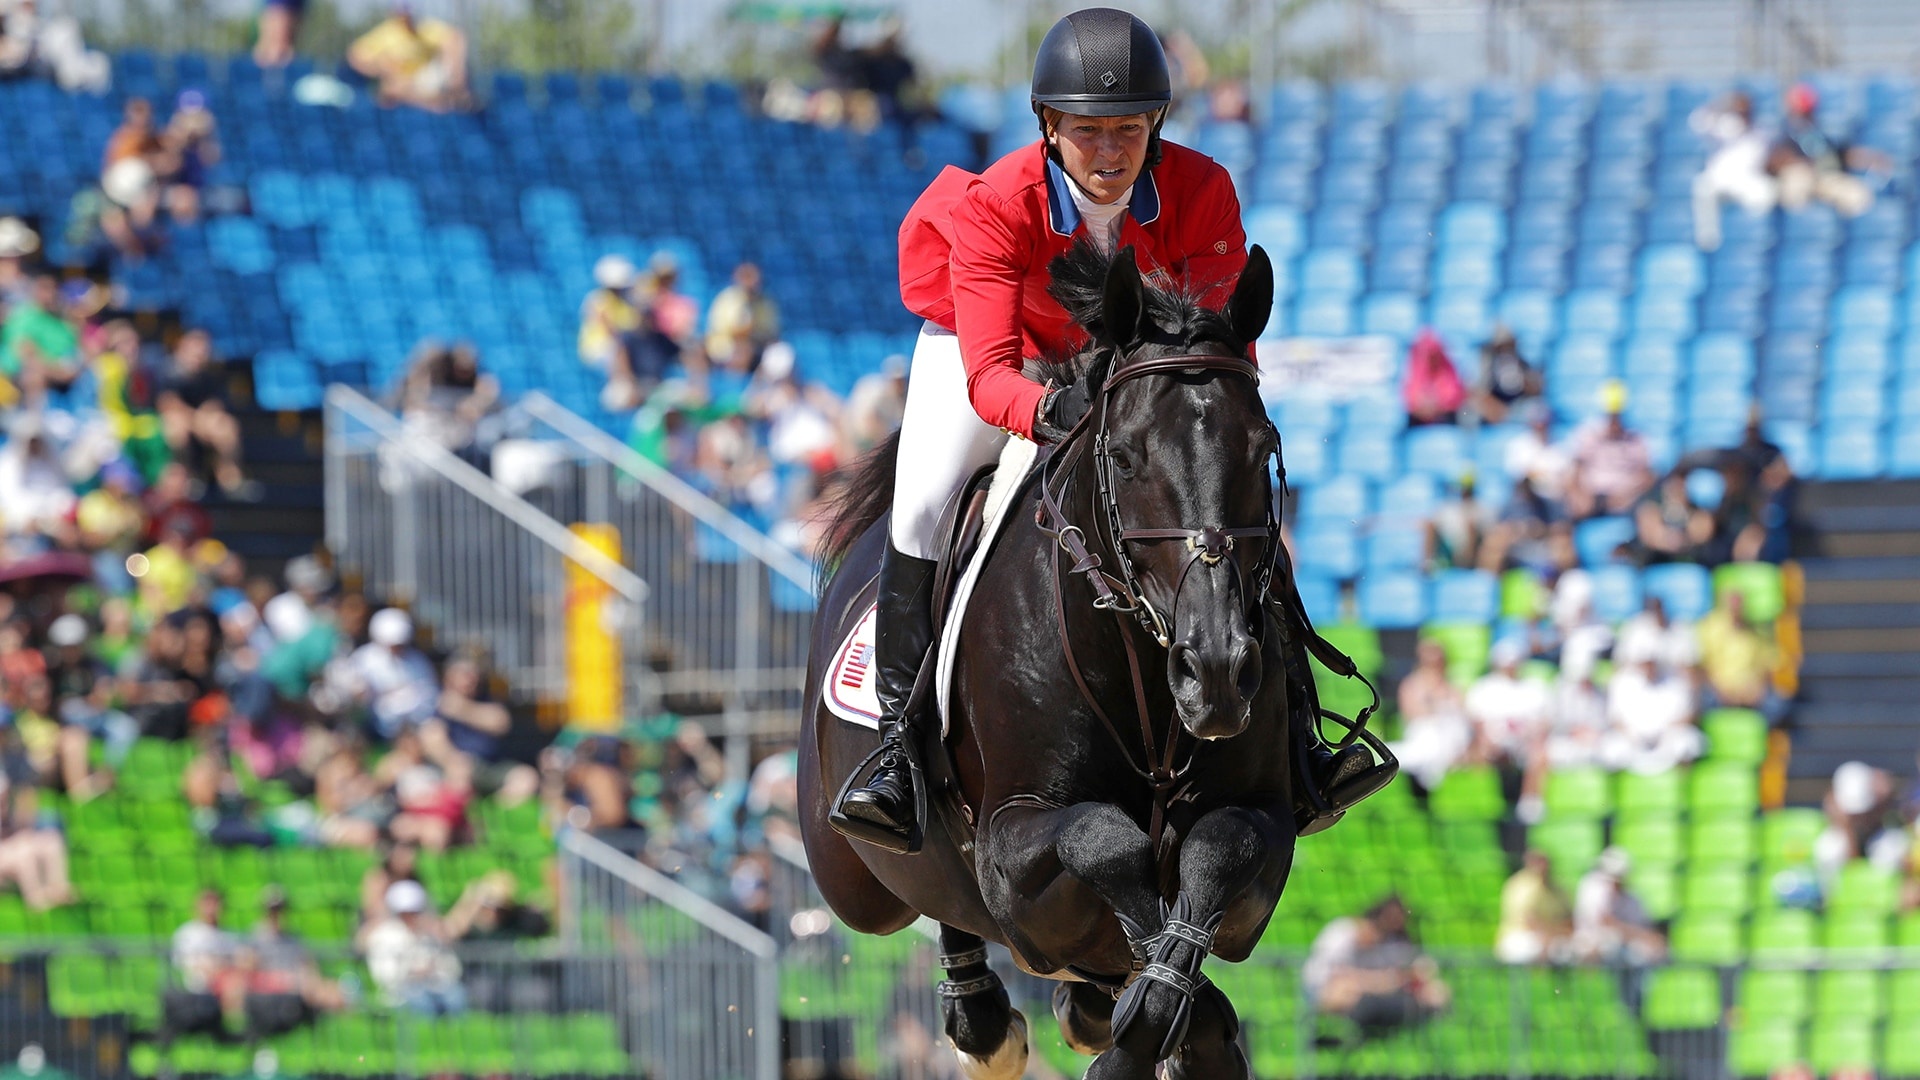 Eventing: Show jumping, Official Olympic sport and a popular outdoor recreational activity. 1920x1080 Full HD Wallpaper.